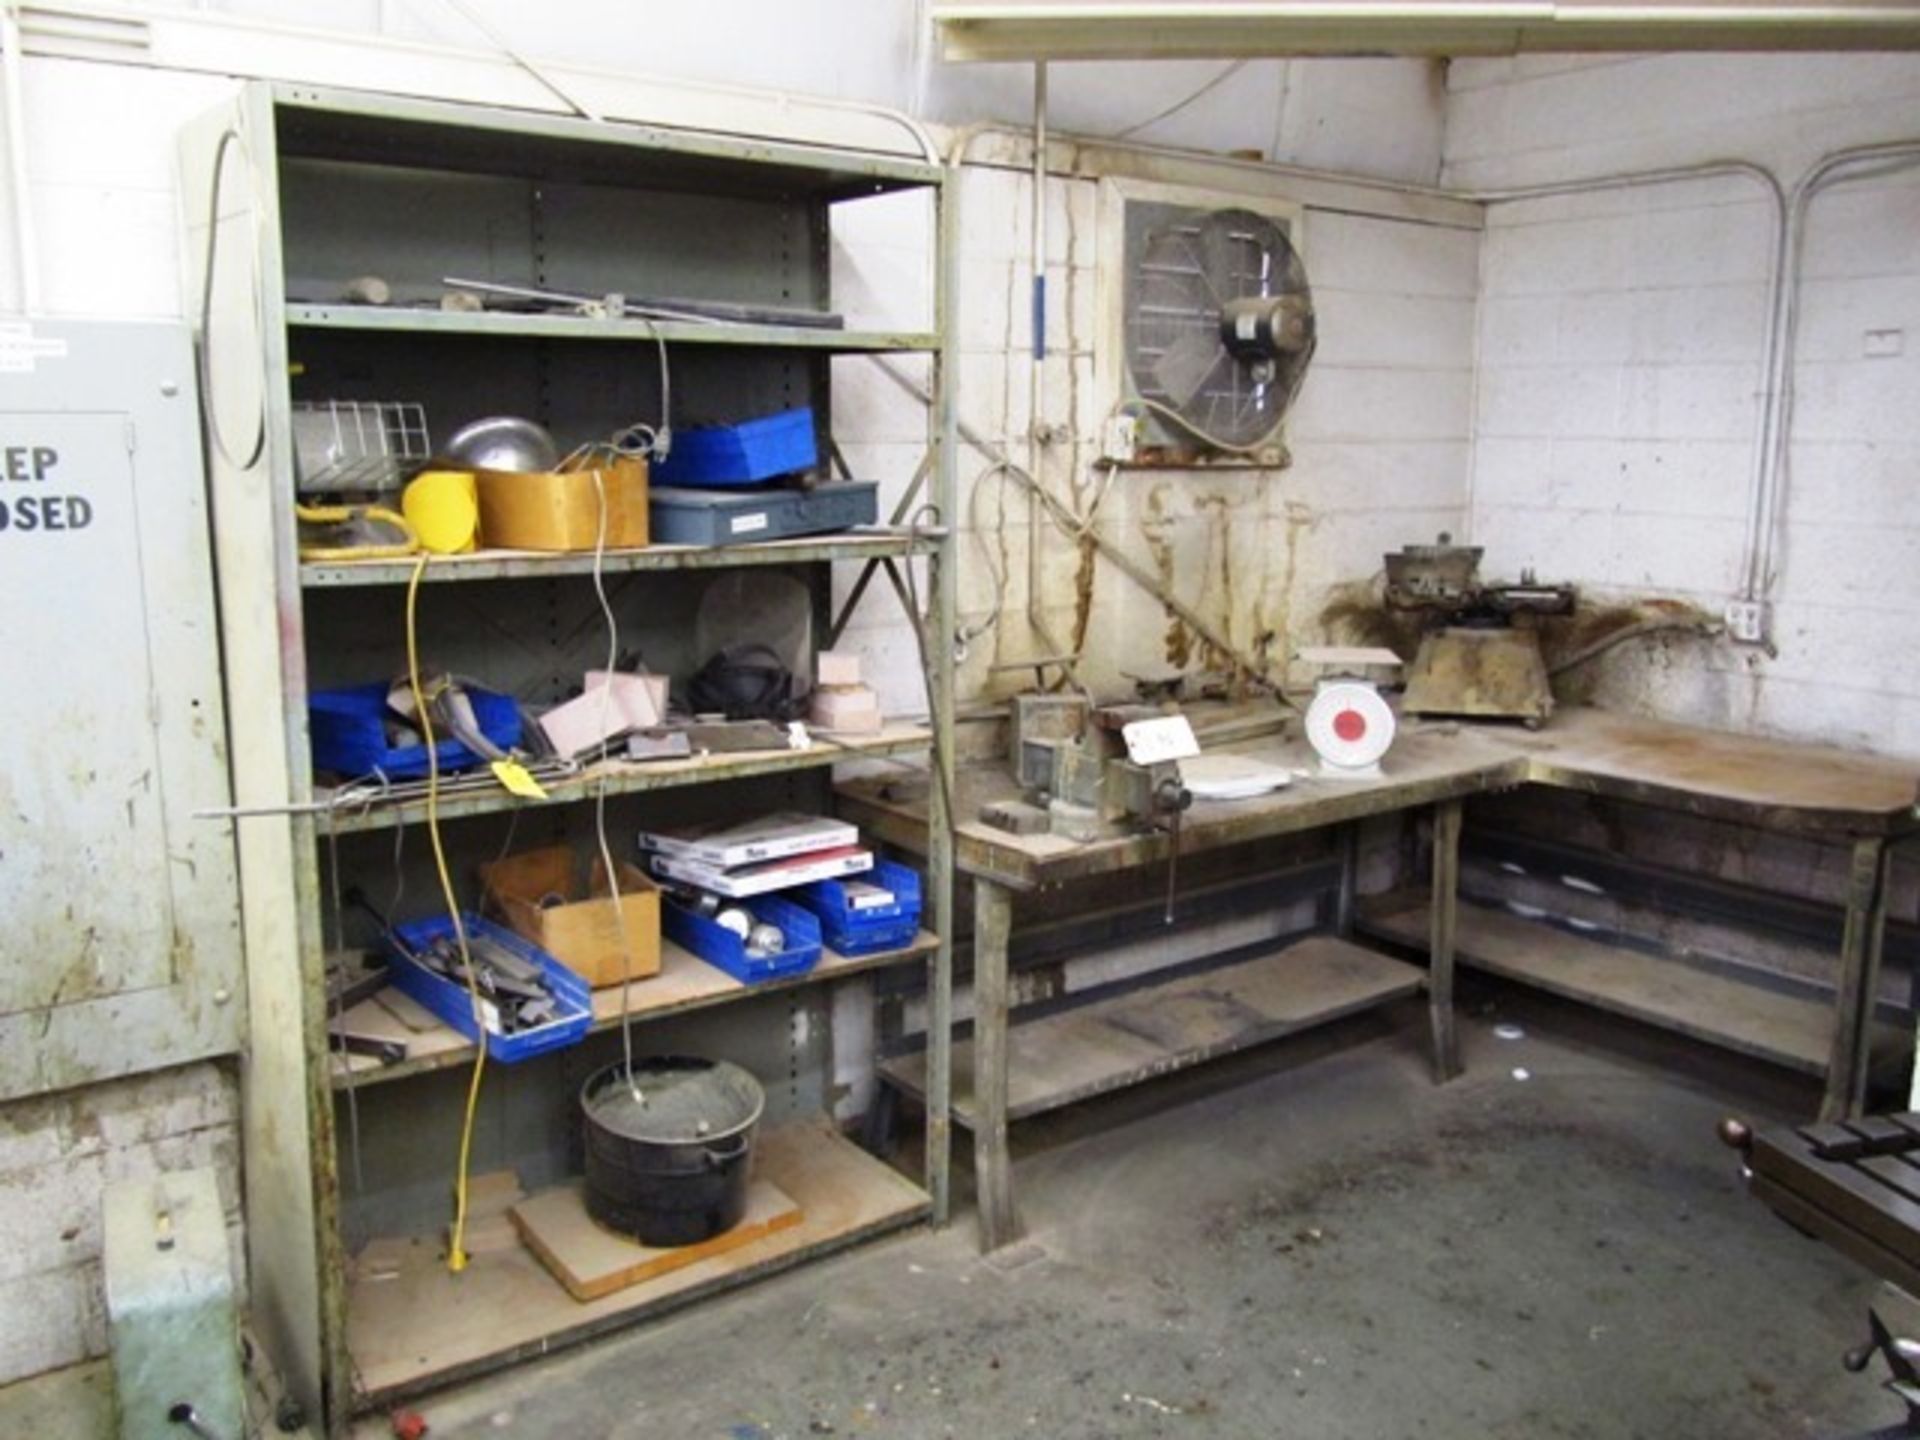 Workbench with Vise, Scales, Paint Shaker (in corner), & Shelf with Contents